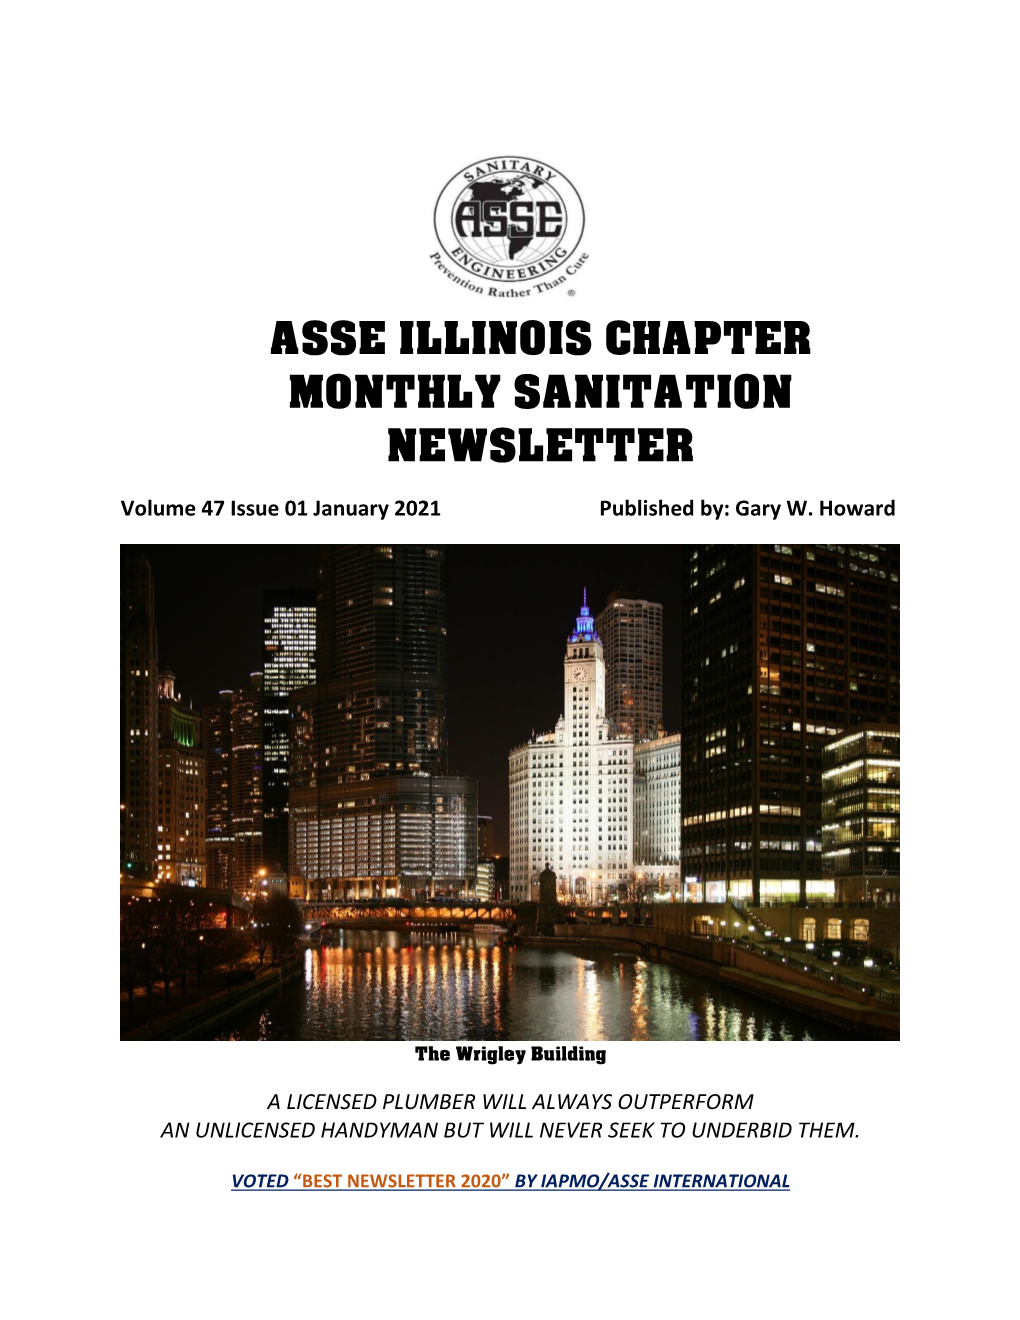 January 2021 Issue of IL Chapter ASSE News